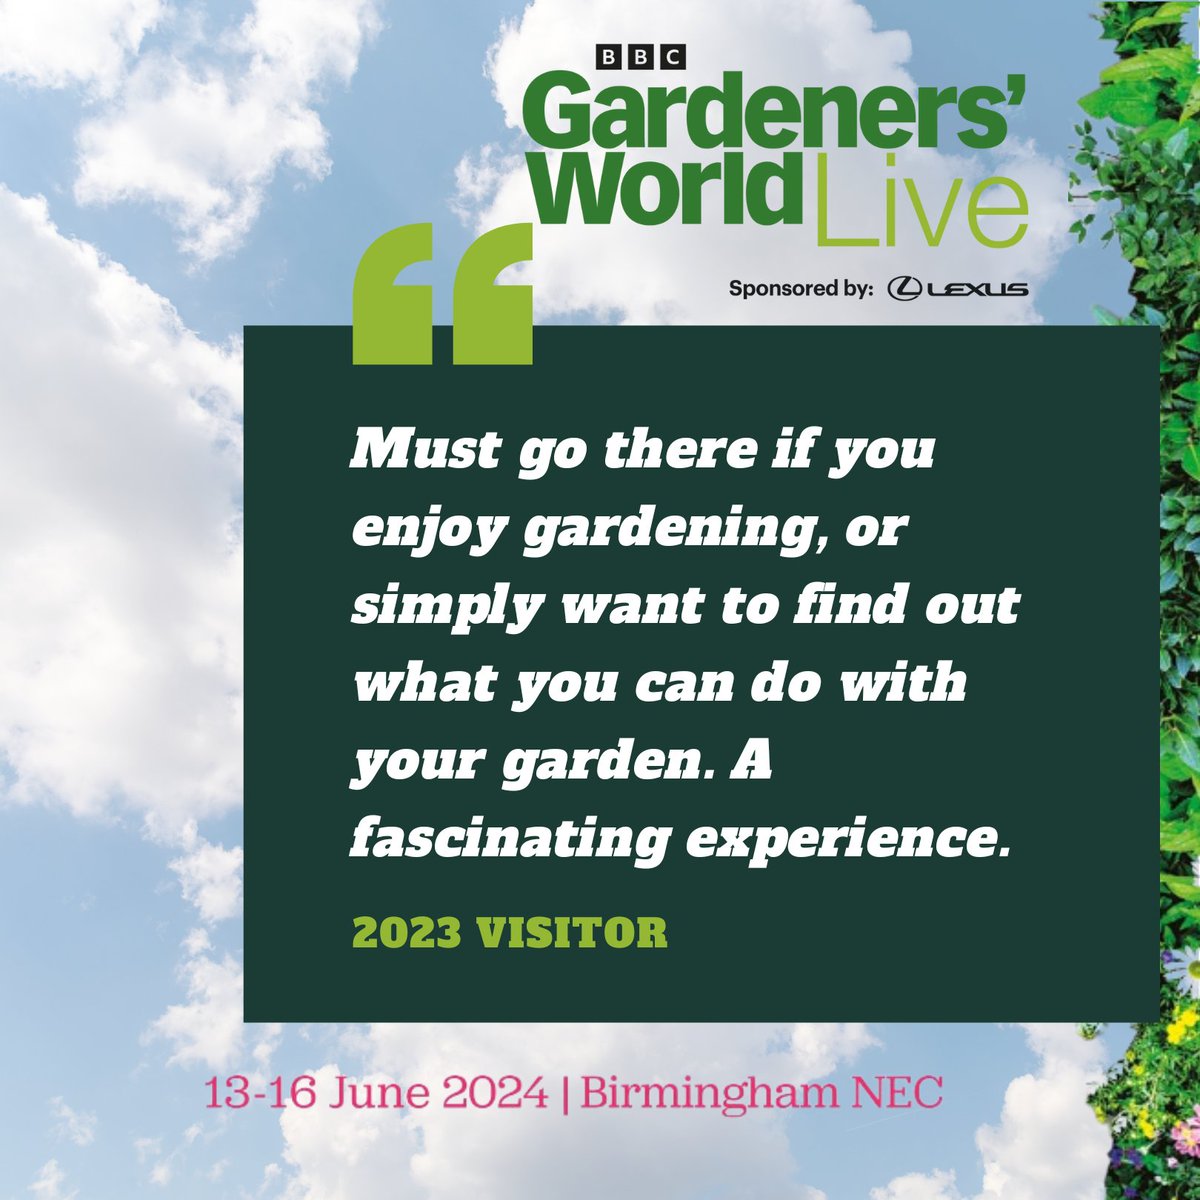 🌿🌸 Calling all garden enthusiasts and starting-out novices alike - this really is the garden show with something for everyone and.....get ready.....because it's nearly time! Get your tickets and we'll see you there! 🌱 bbcgardenersworldlive.com/garden-inspira…